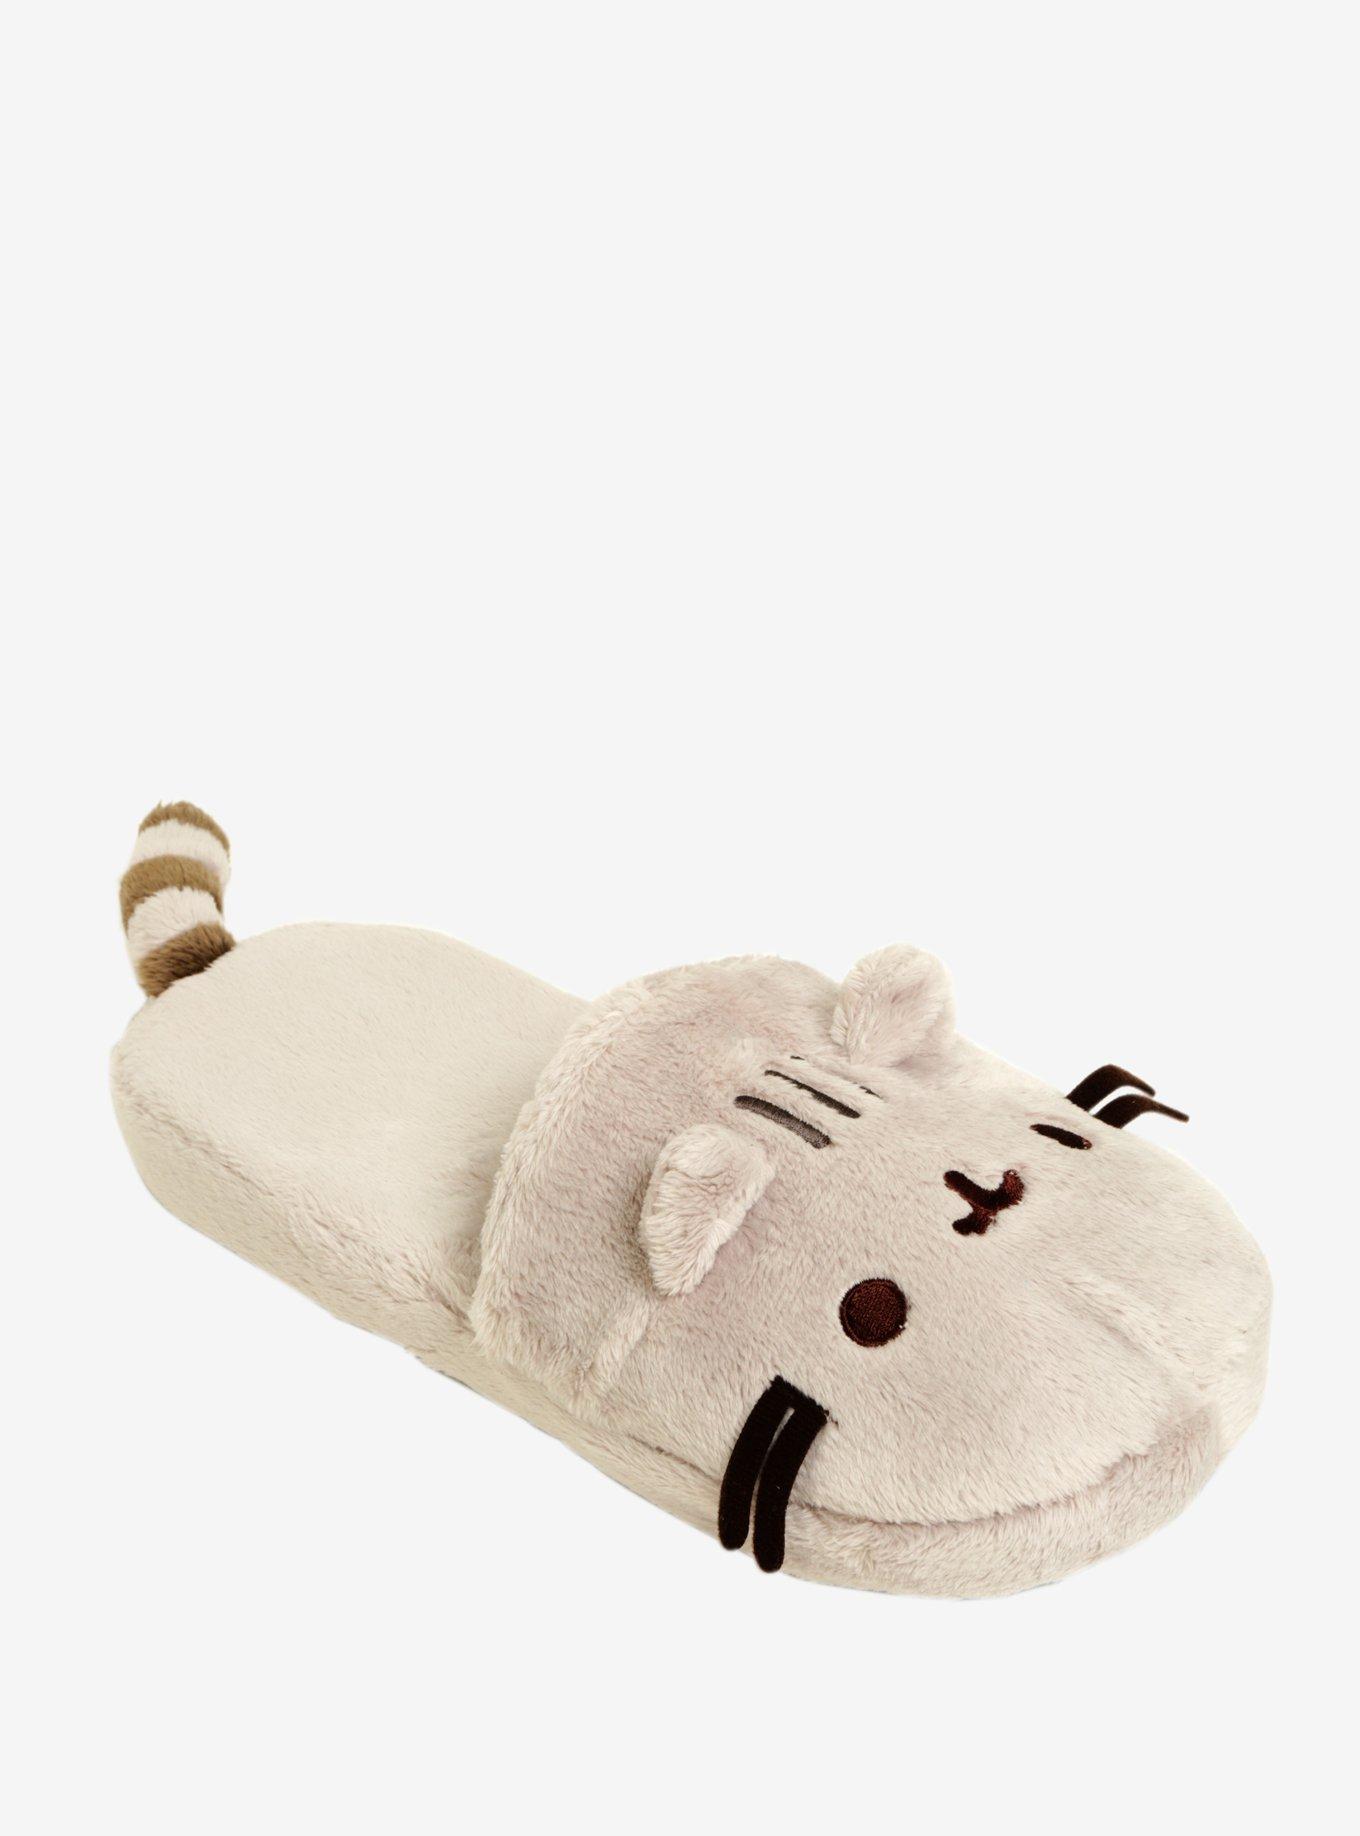 Pusheen Plush Slippers Soft Home Shoes GUND Cute Cozy Comfortable Christmas Gift 